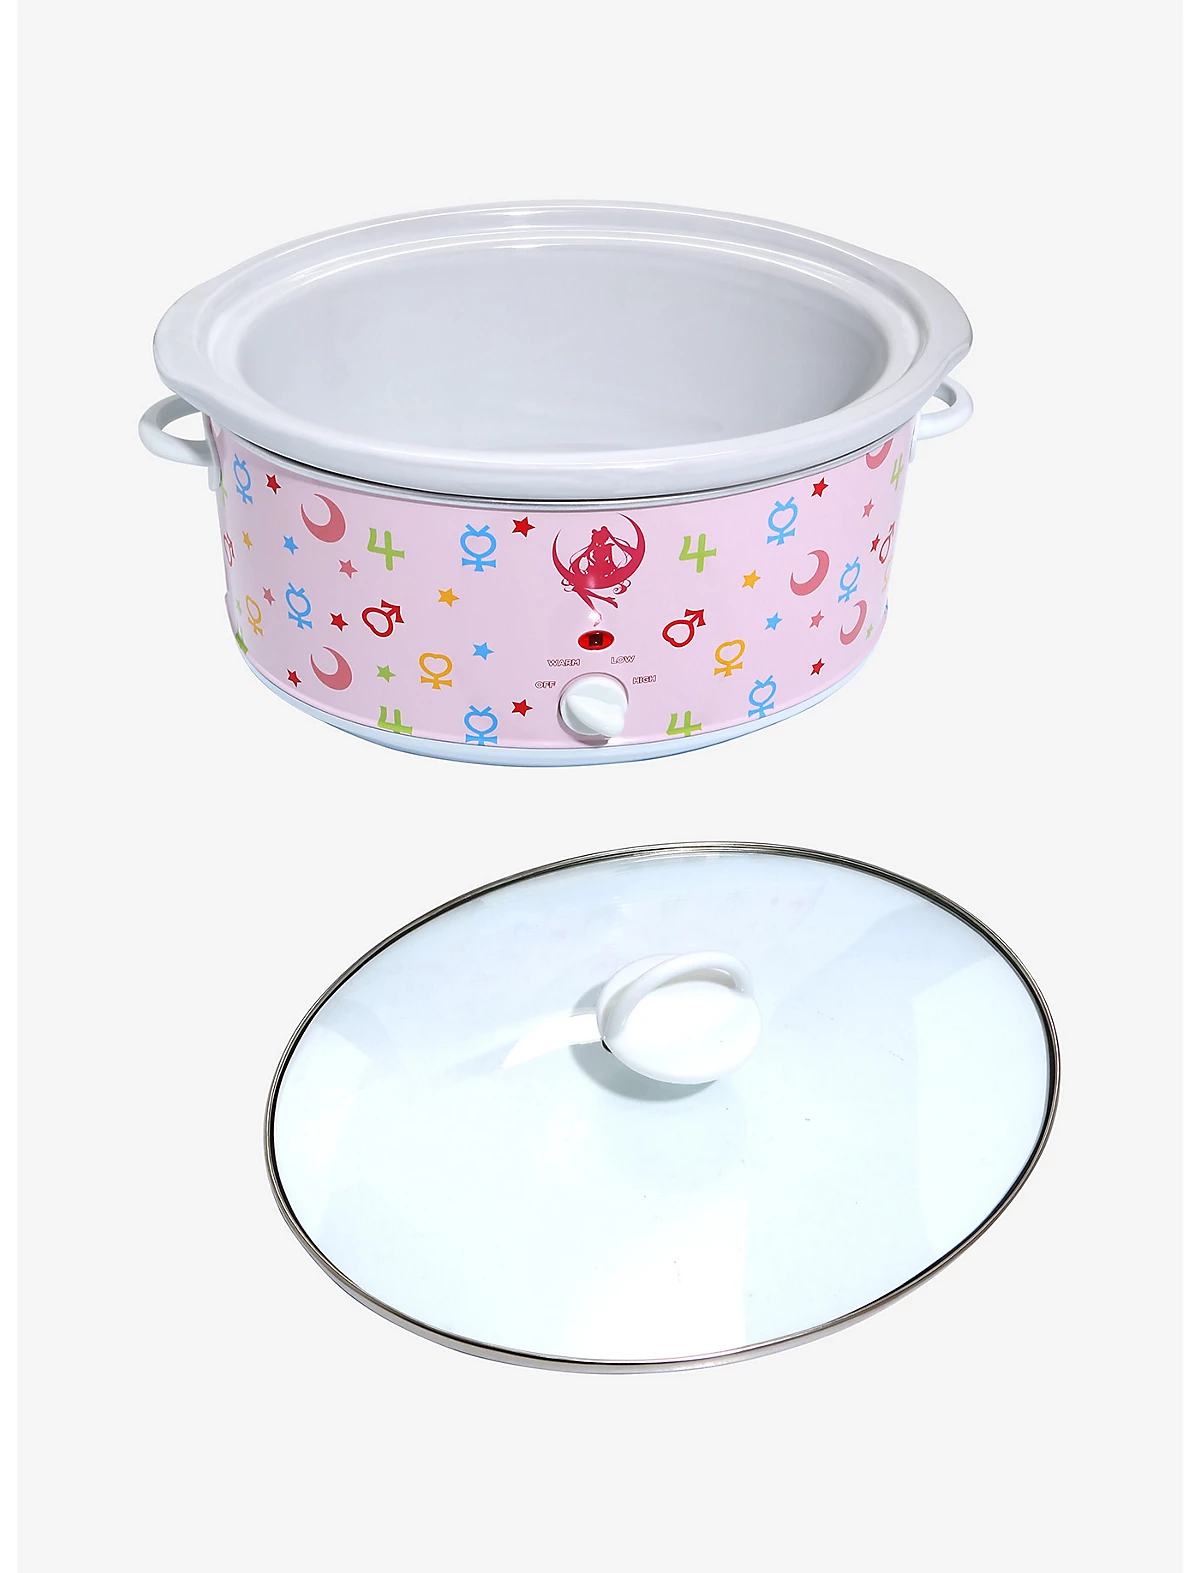 I used my Sailor Moon Crockpot i bought from Boxlunch to make Homemade